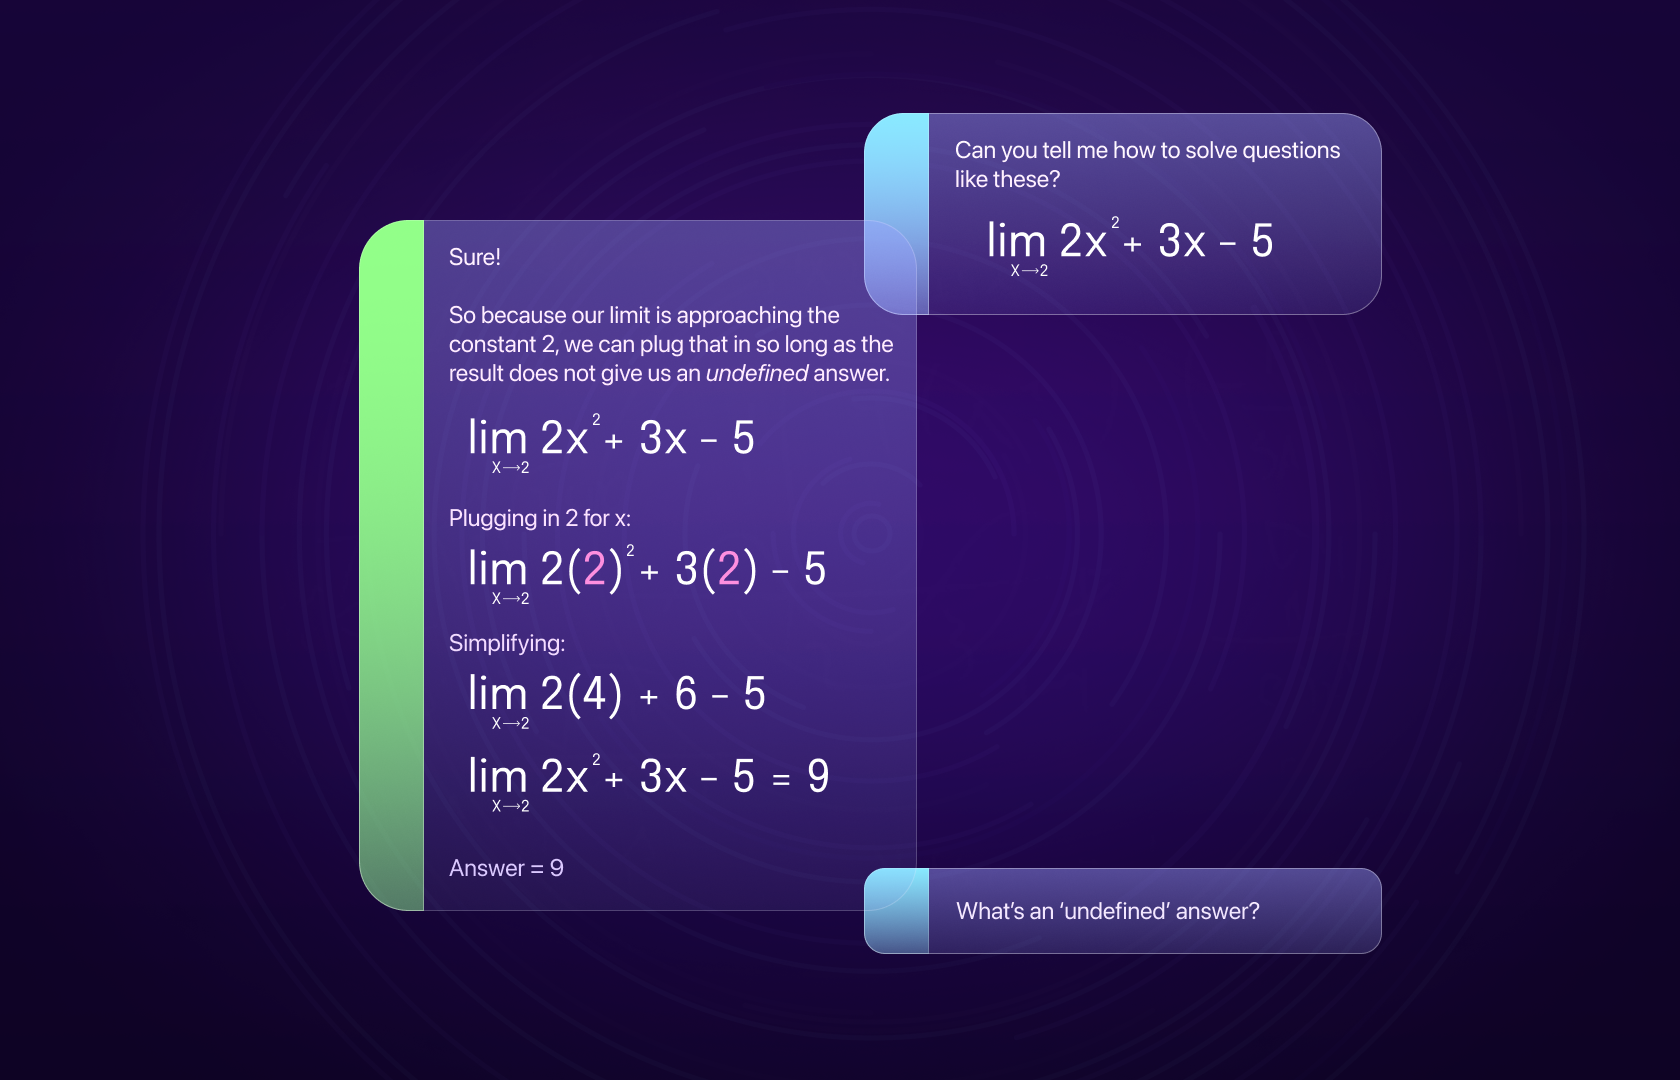 Build an AI Chatbot to Help with Math Problem Sets Image